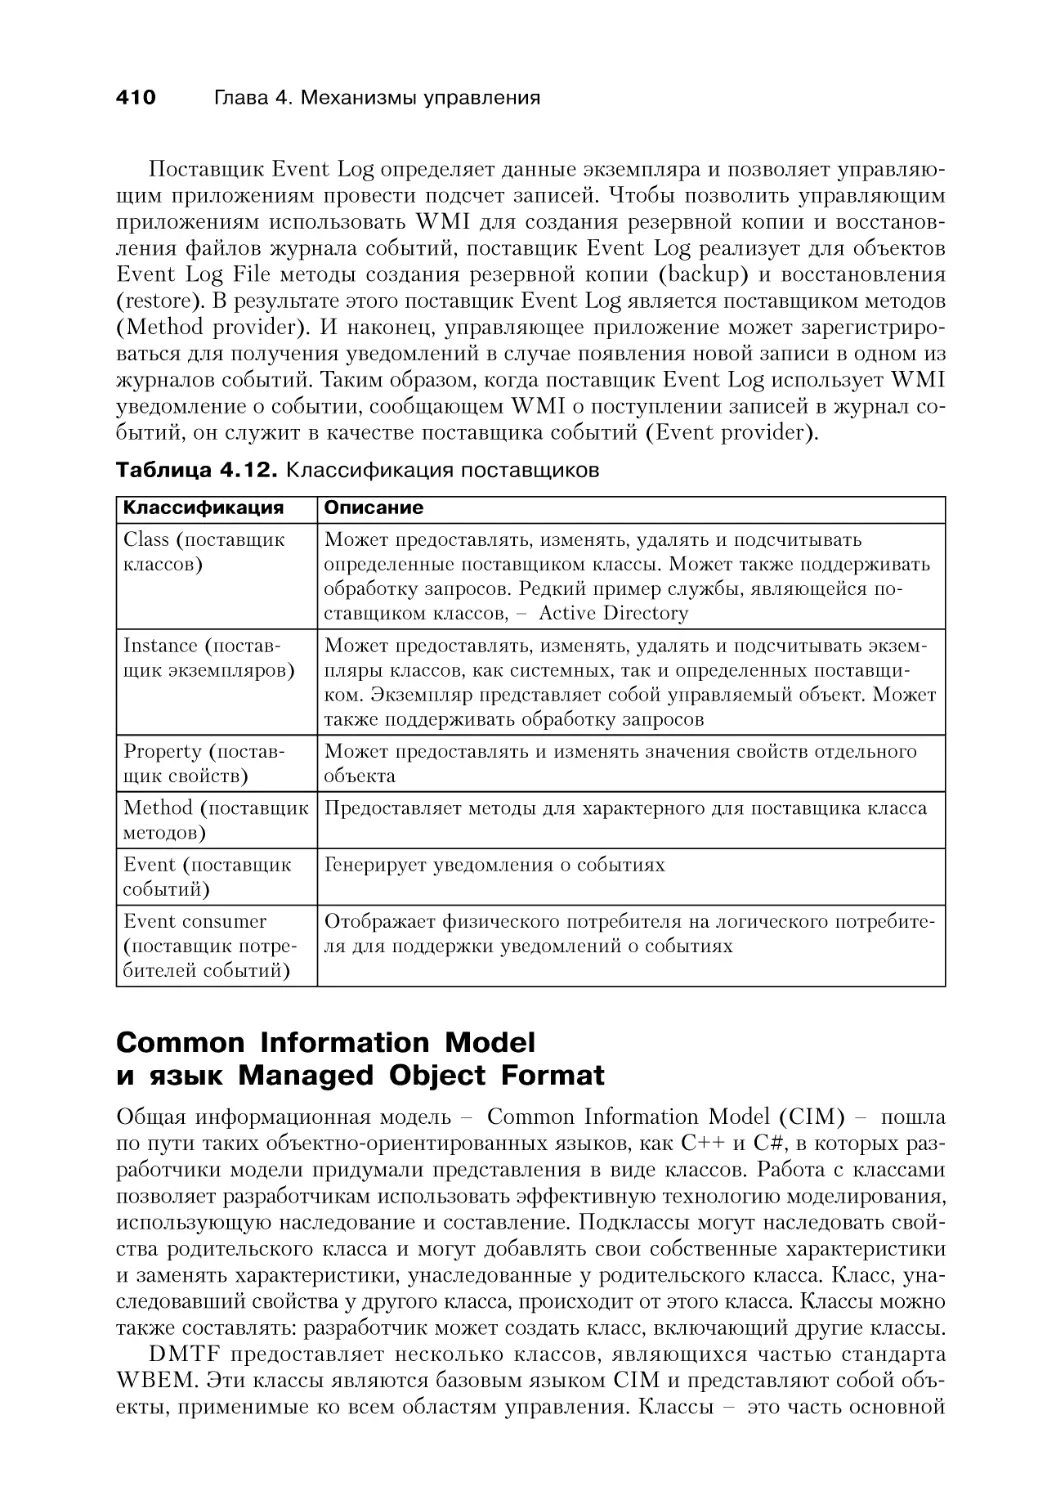 Common Information Model и язык Managed Object Format